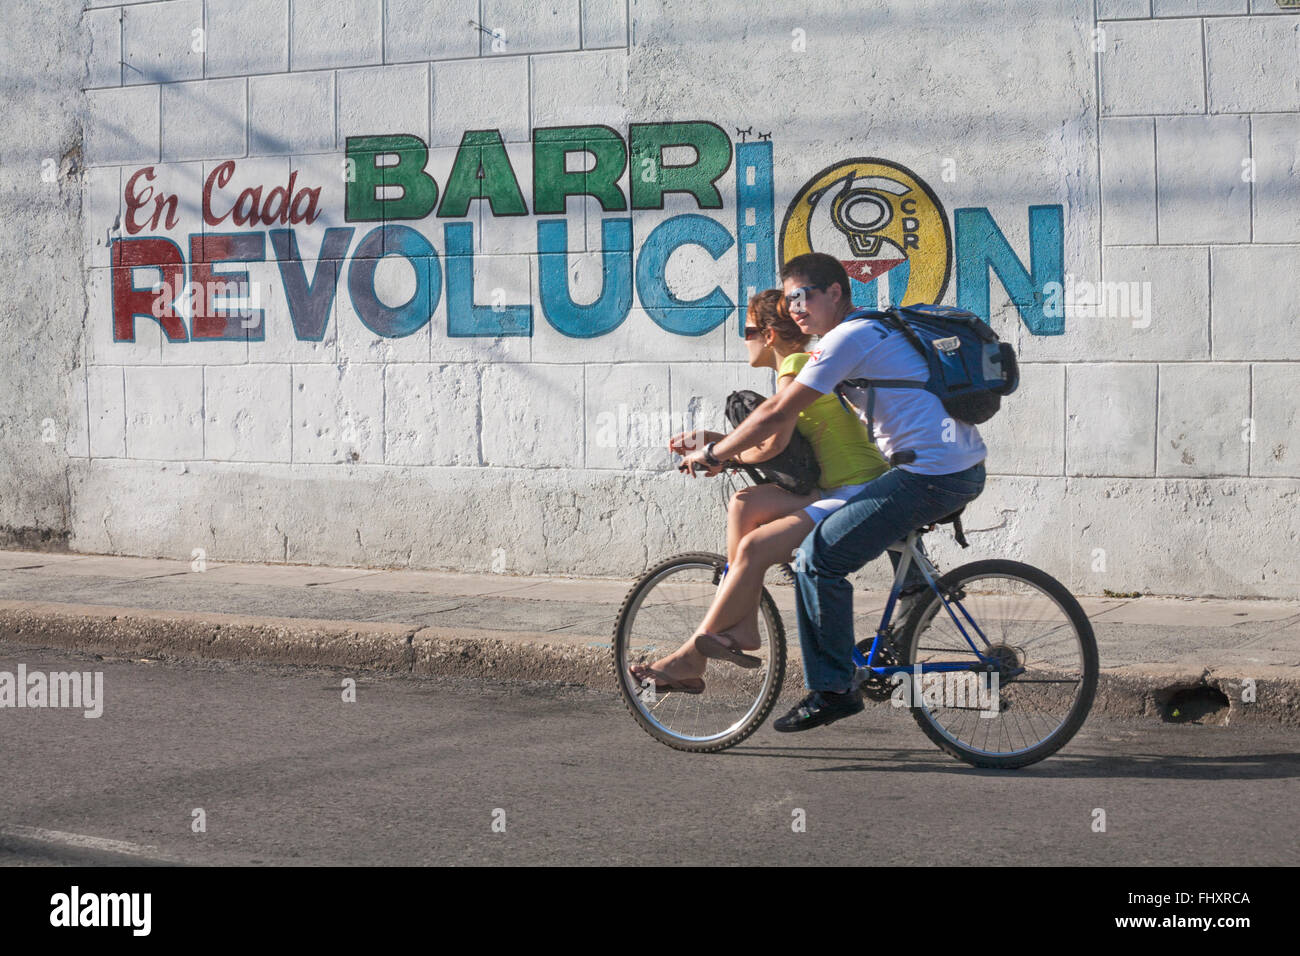 Daily life in Cuba - Young couple riding bicycle past wall with en cada barr revolucion slogan on at Cienfuegos, Cuba Stock Photo